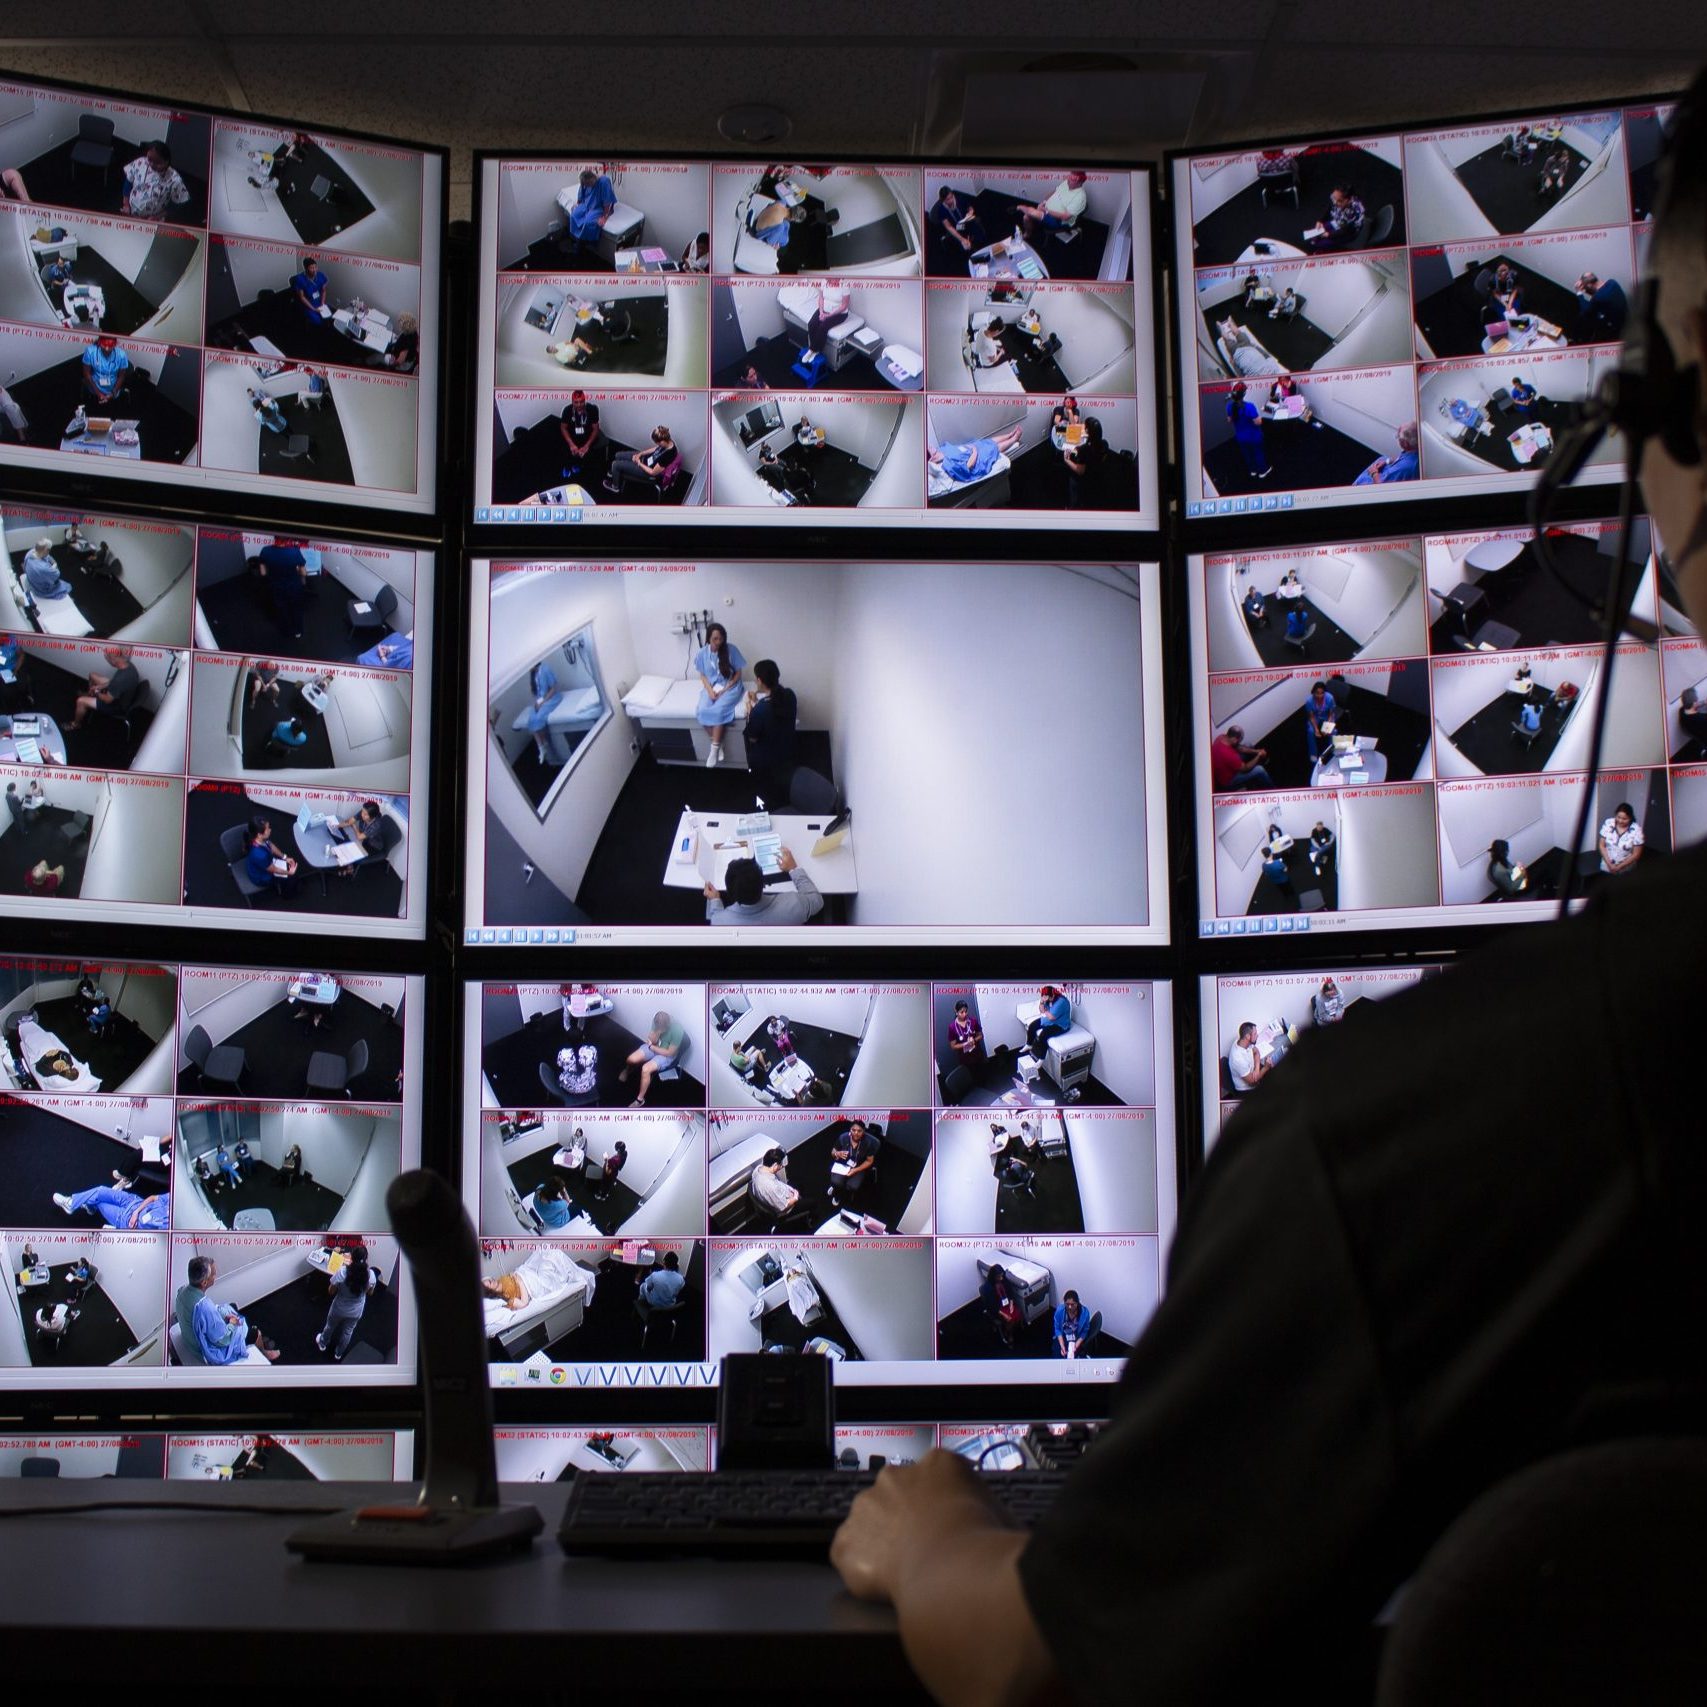 A person watching multiple screens in a control room